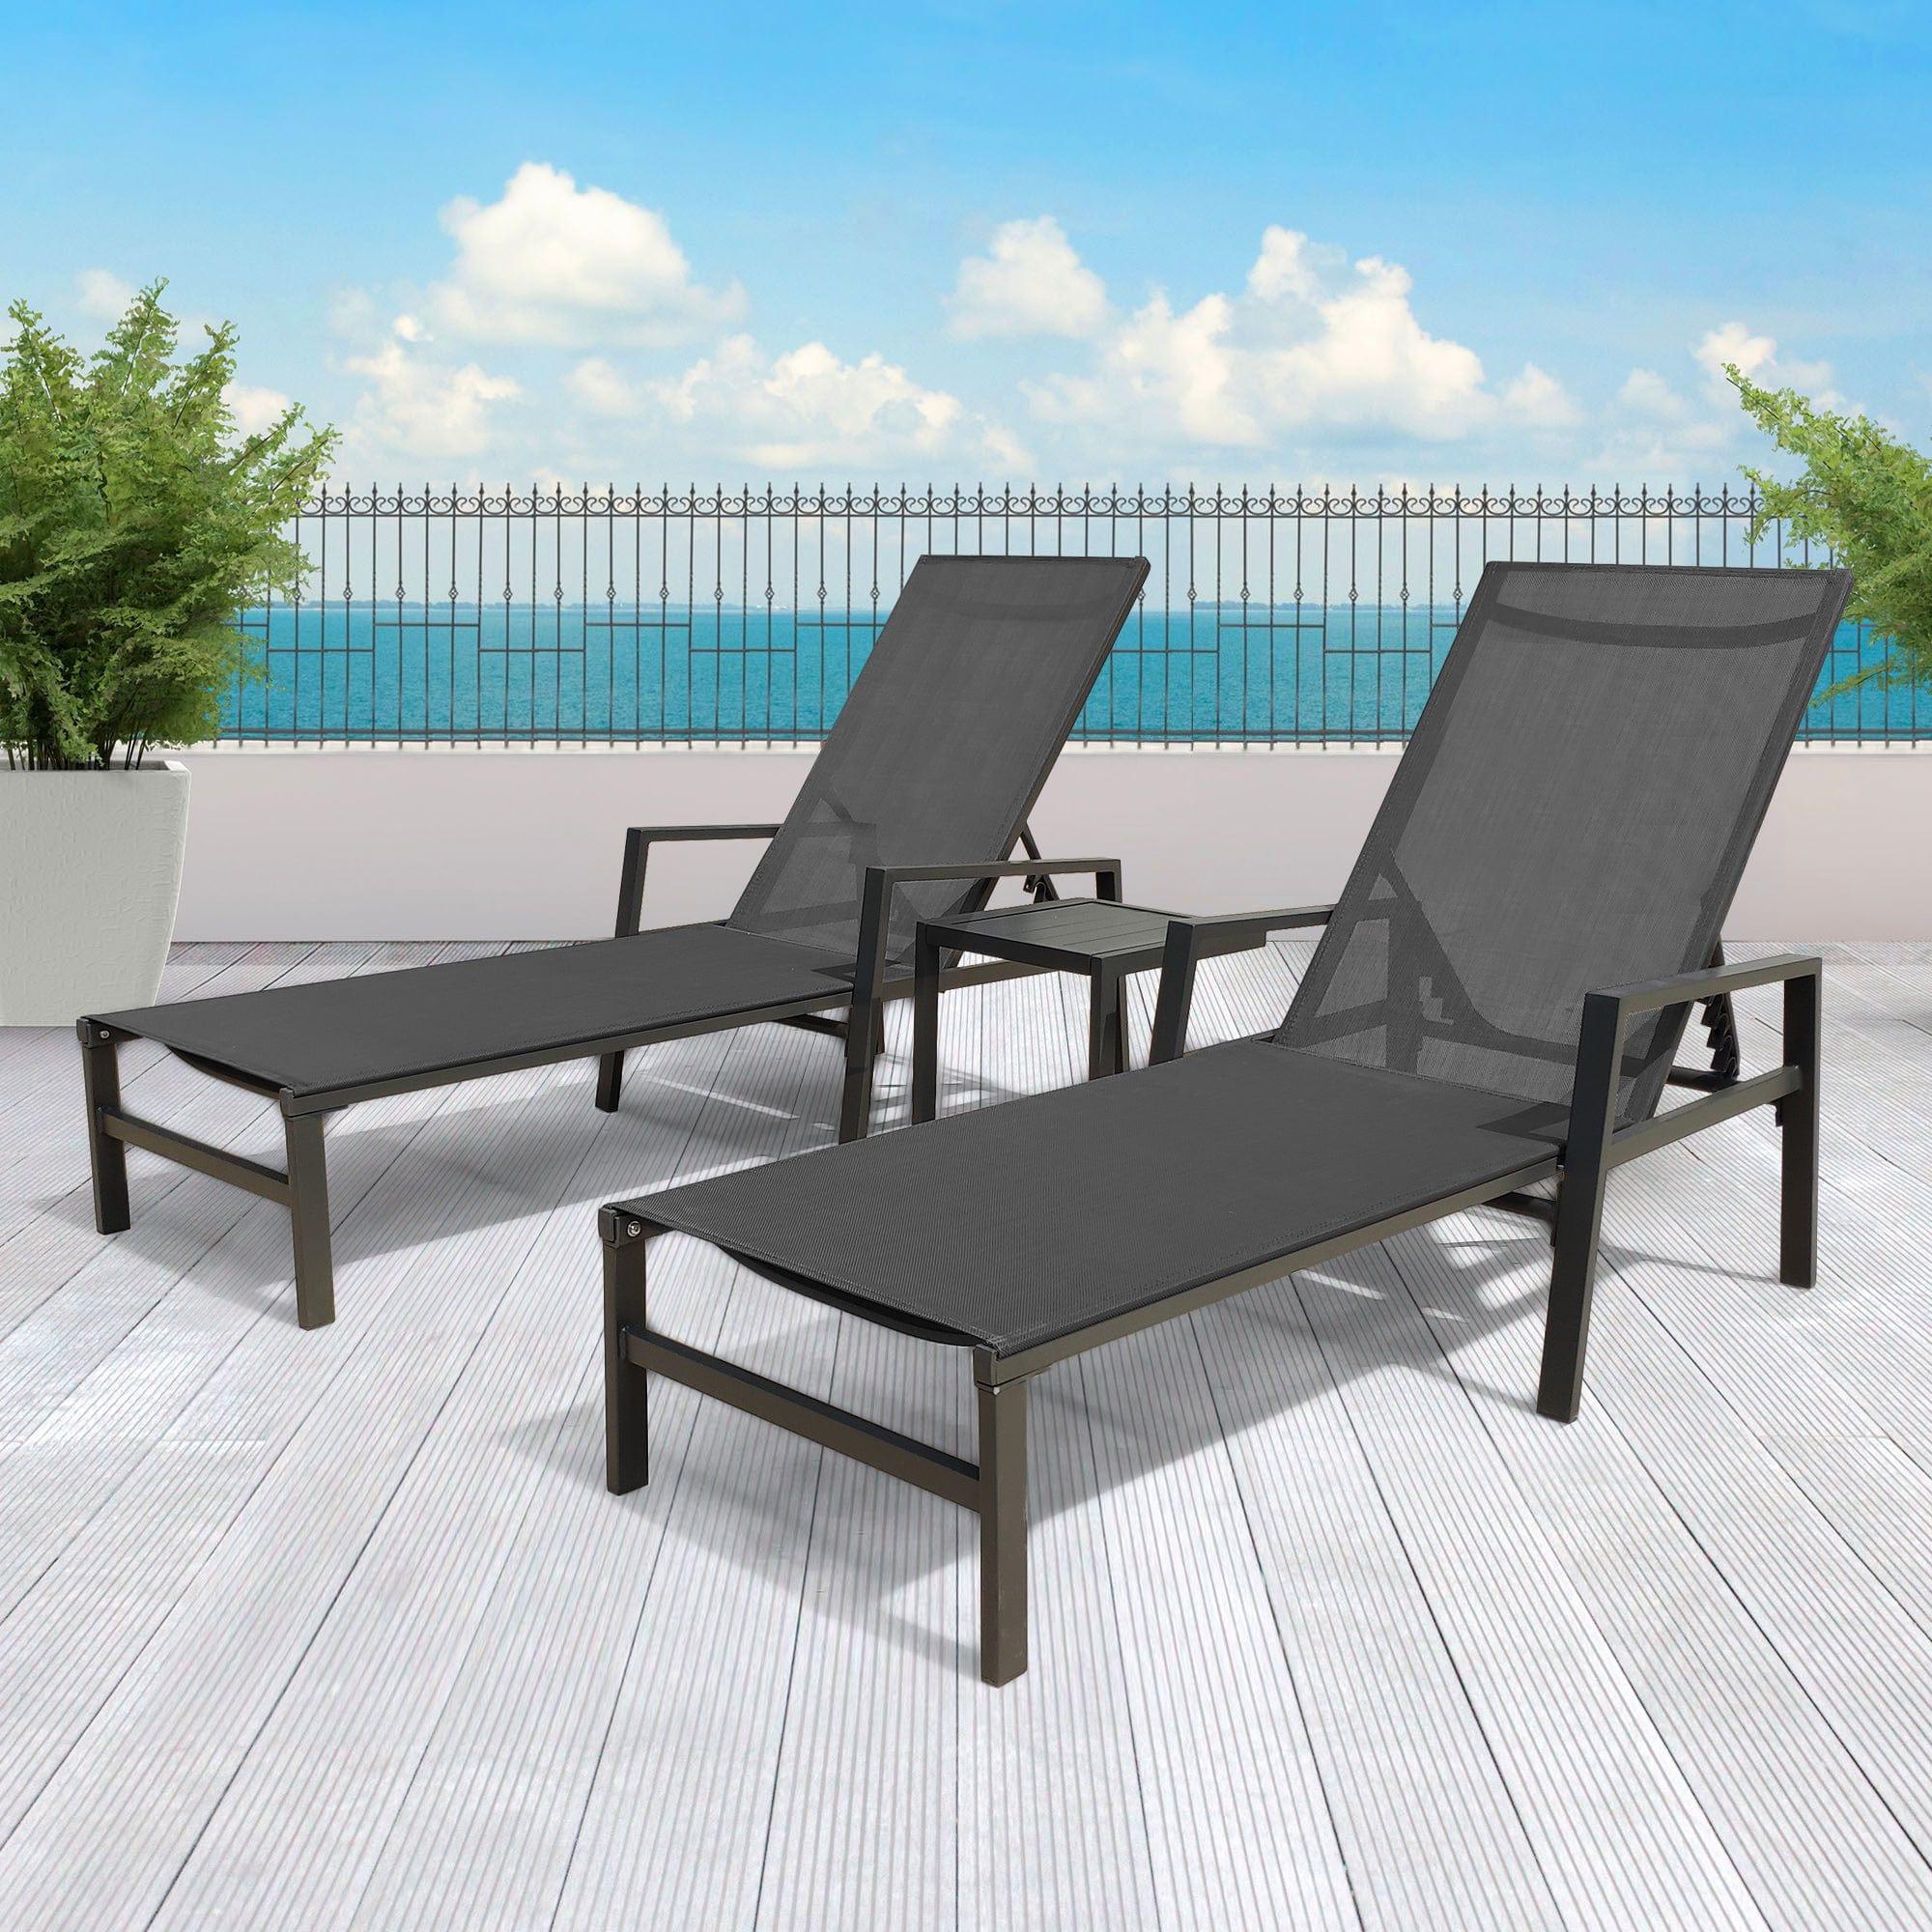 Shop Outdoor 3-Pcs Set Chaise Lounge Chairs With Table,Five-Position Adjustable Aluminum Recliners Set,All Weather For Patio,Beach,Yard, Pool(Grey Frame/Dark Gray Fabric) Mademoiselle Home Decor